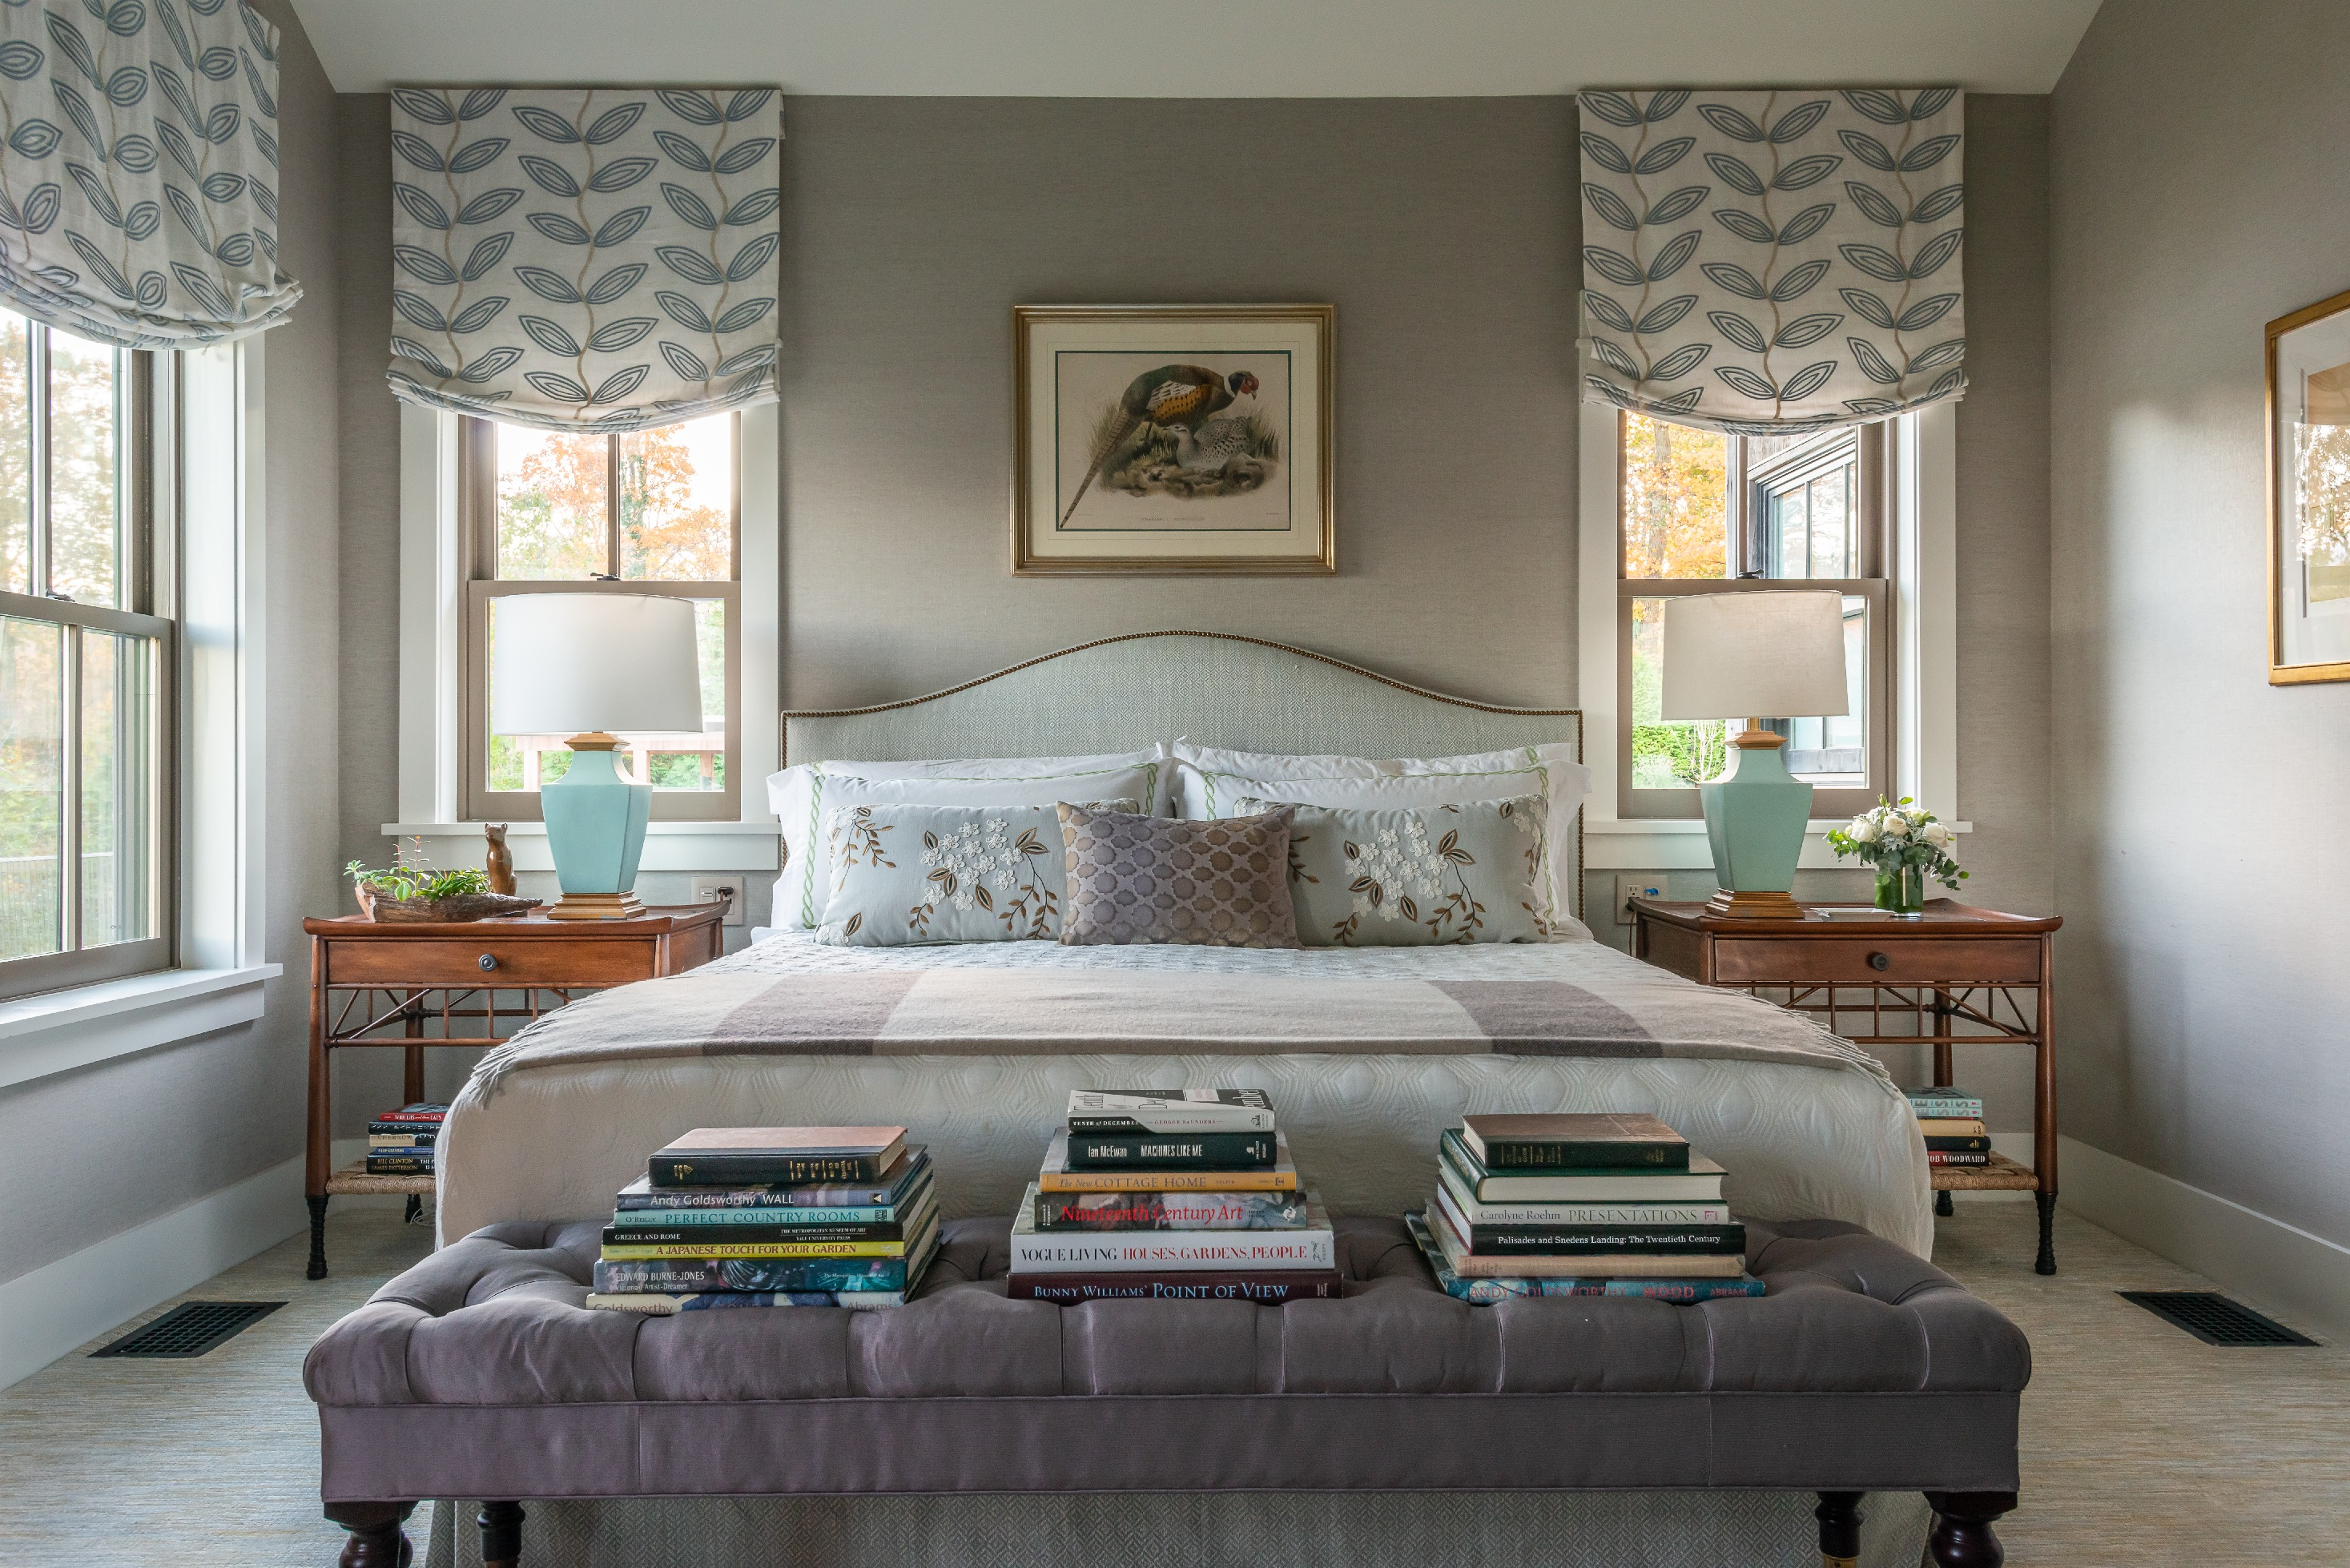  Vacation Home Bedroom. Snedens Landing Residence by Alan Tanksley, Inc..